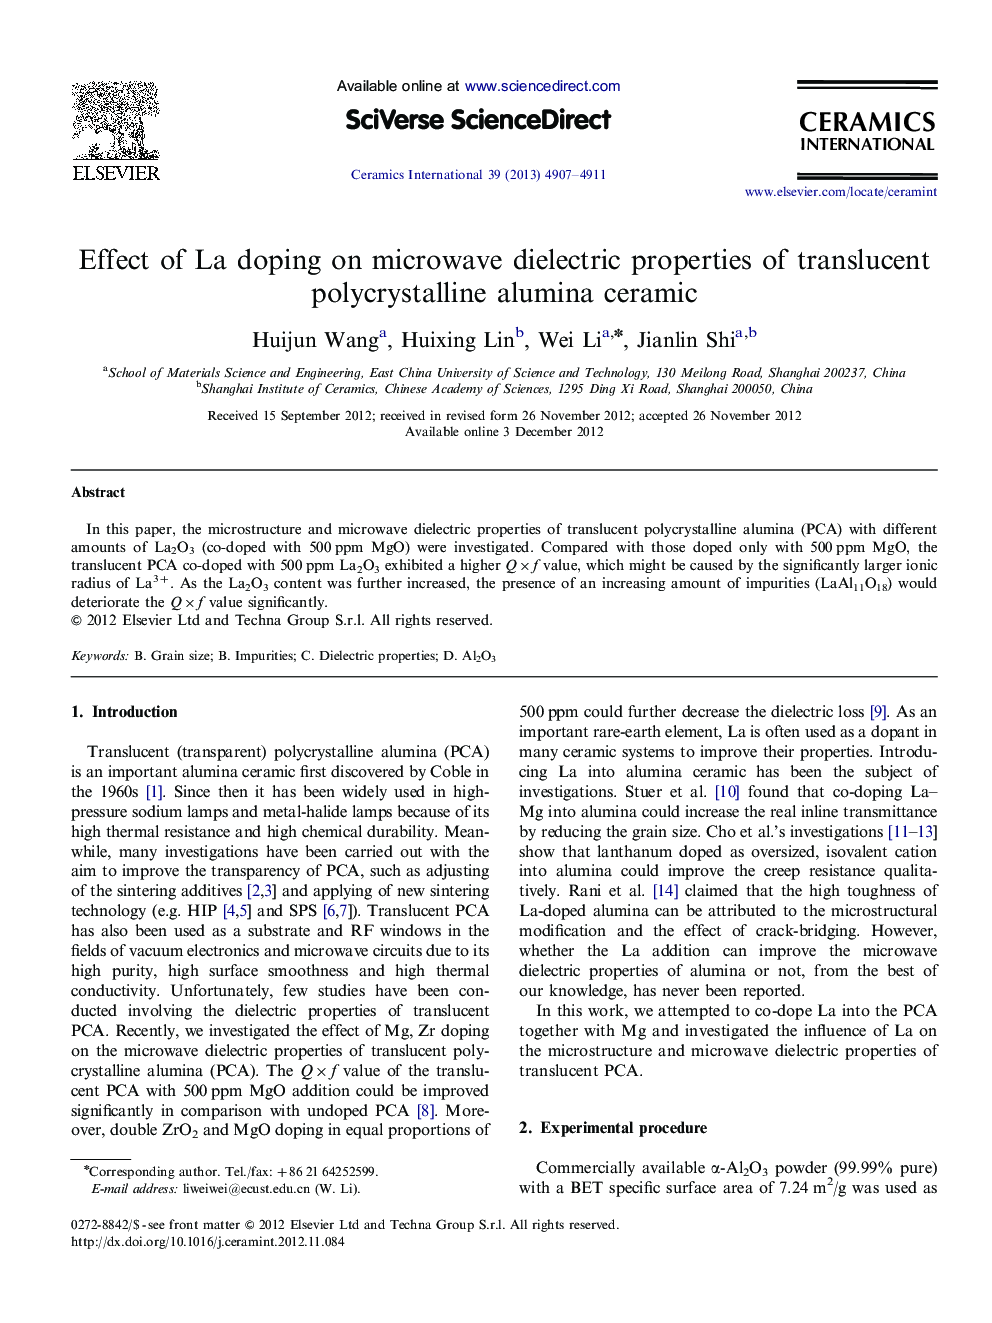 Effect of La doping on microwave dielectric properties of translucent polycrystalline alumina ceramic